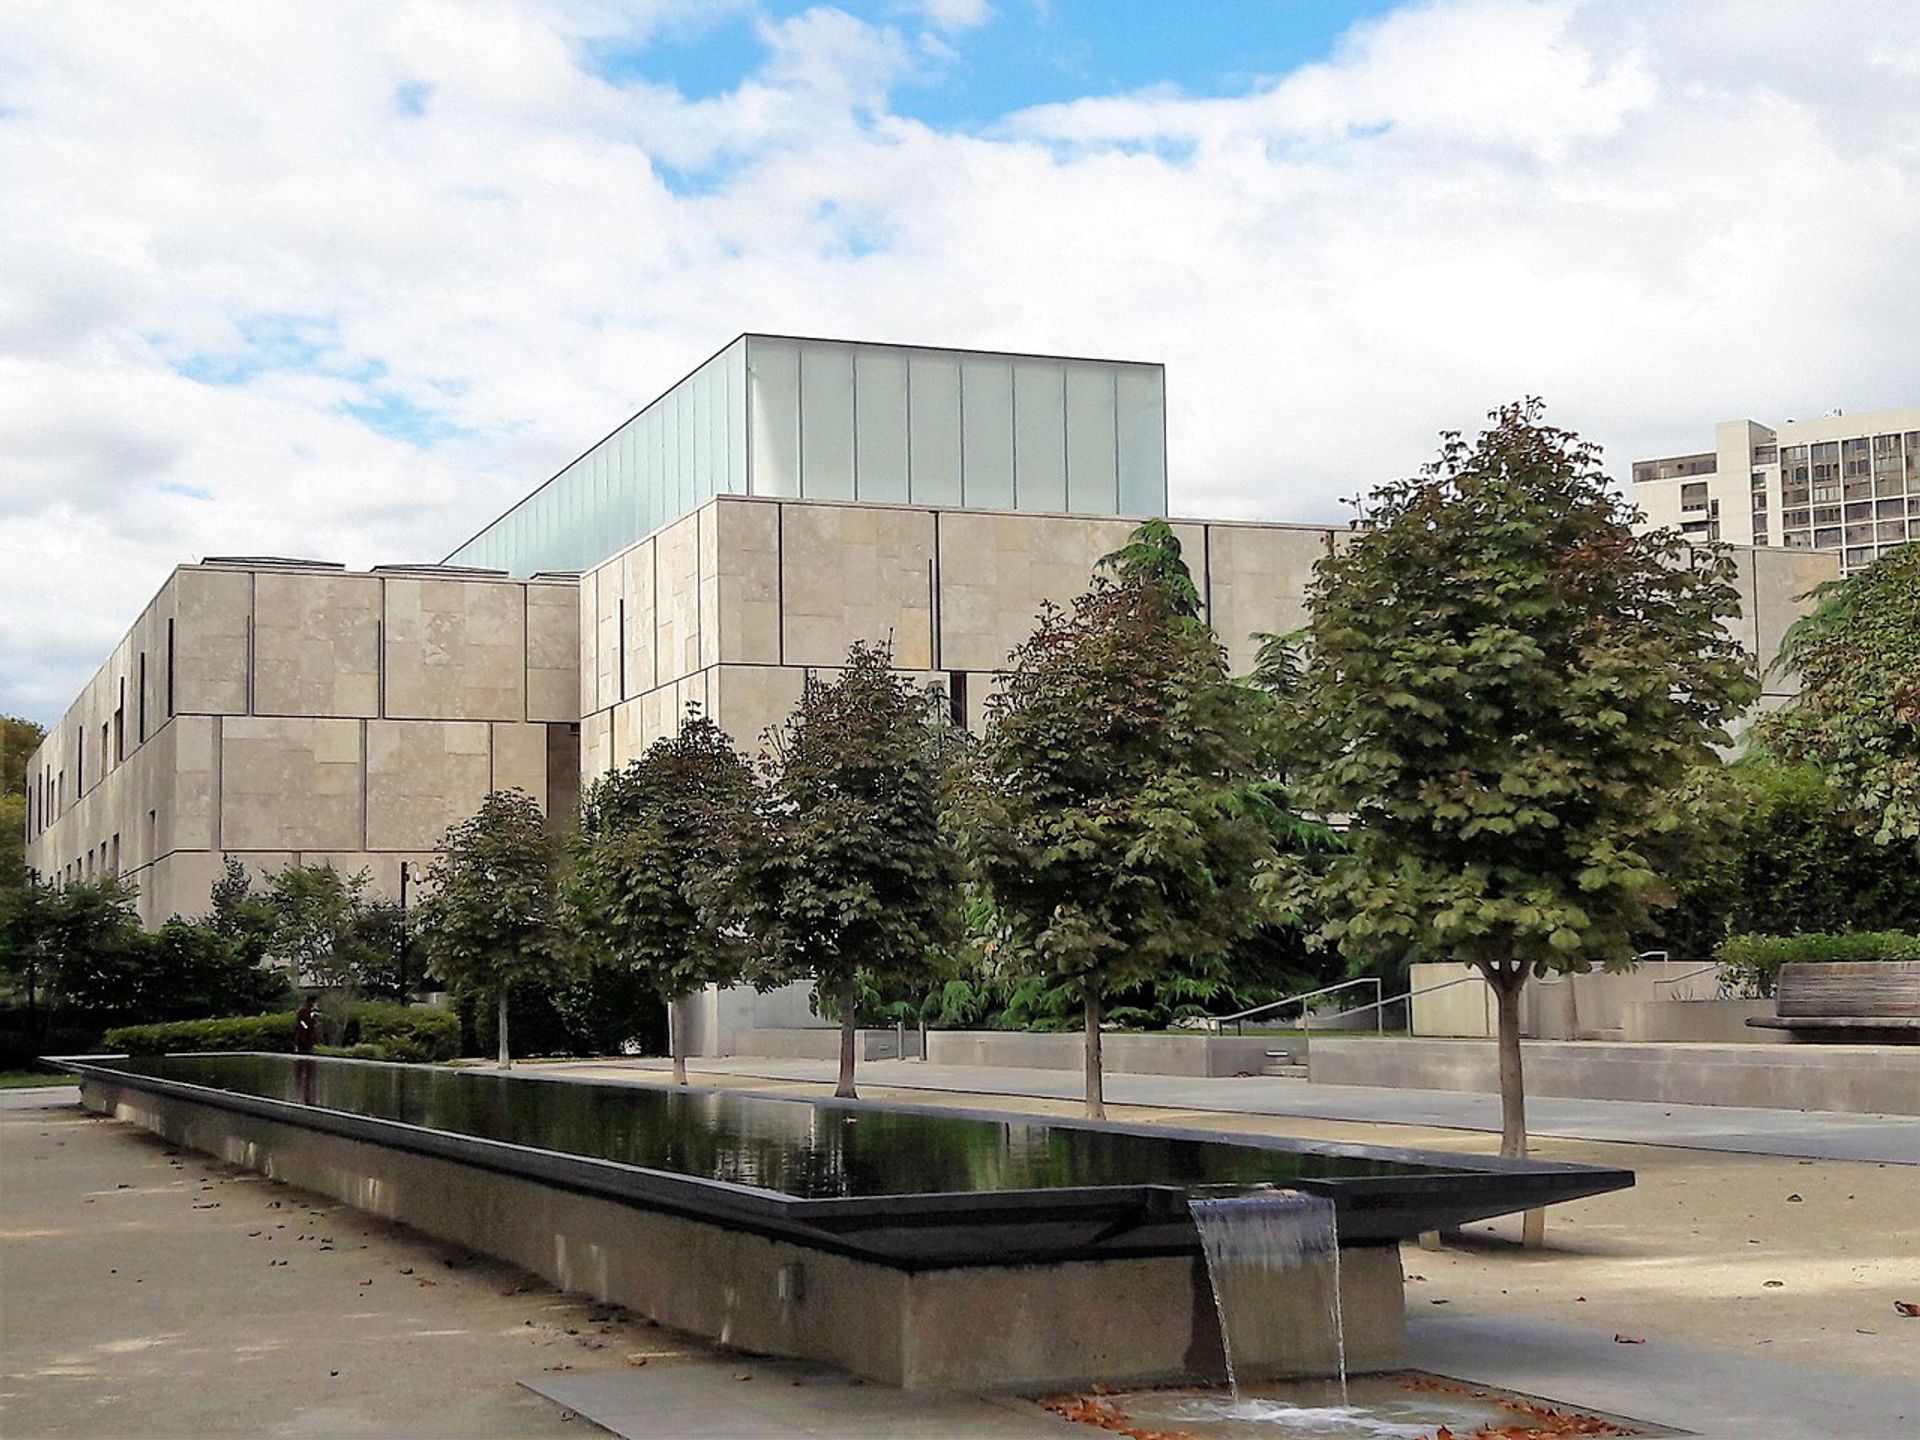 The Barnes Foundation in Philadelphia plans to reopen on Friday 